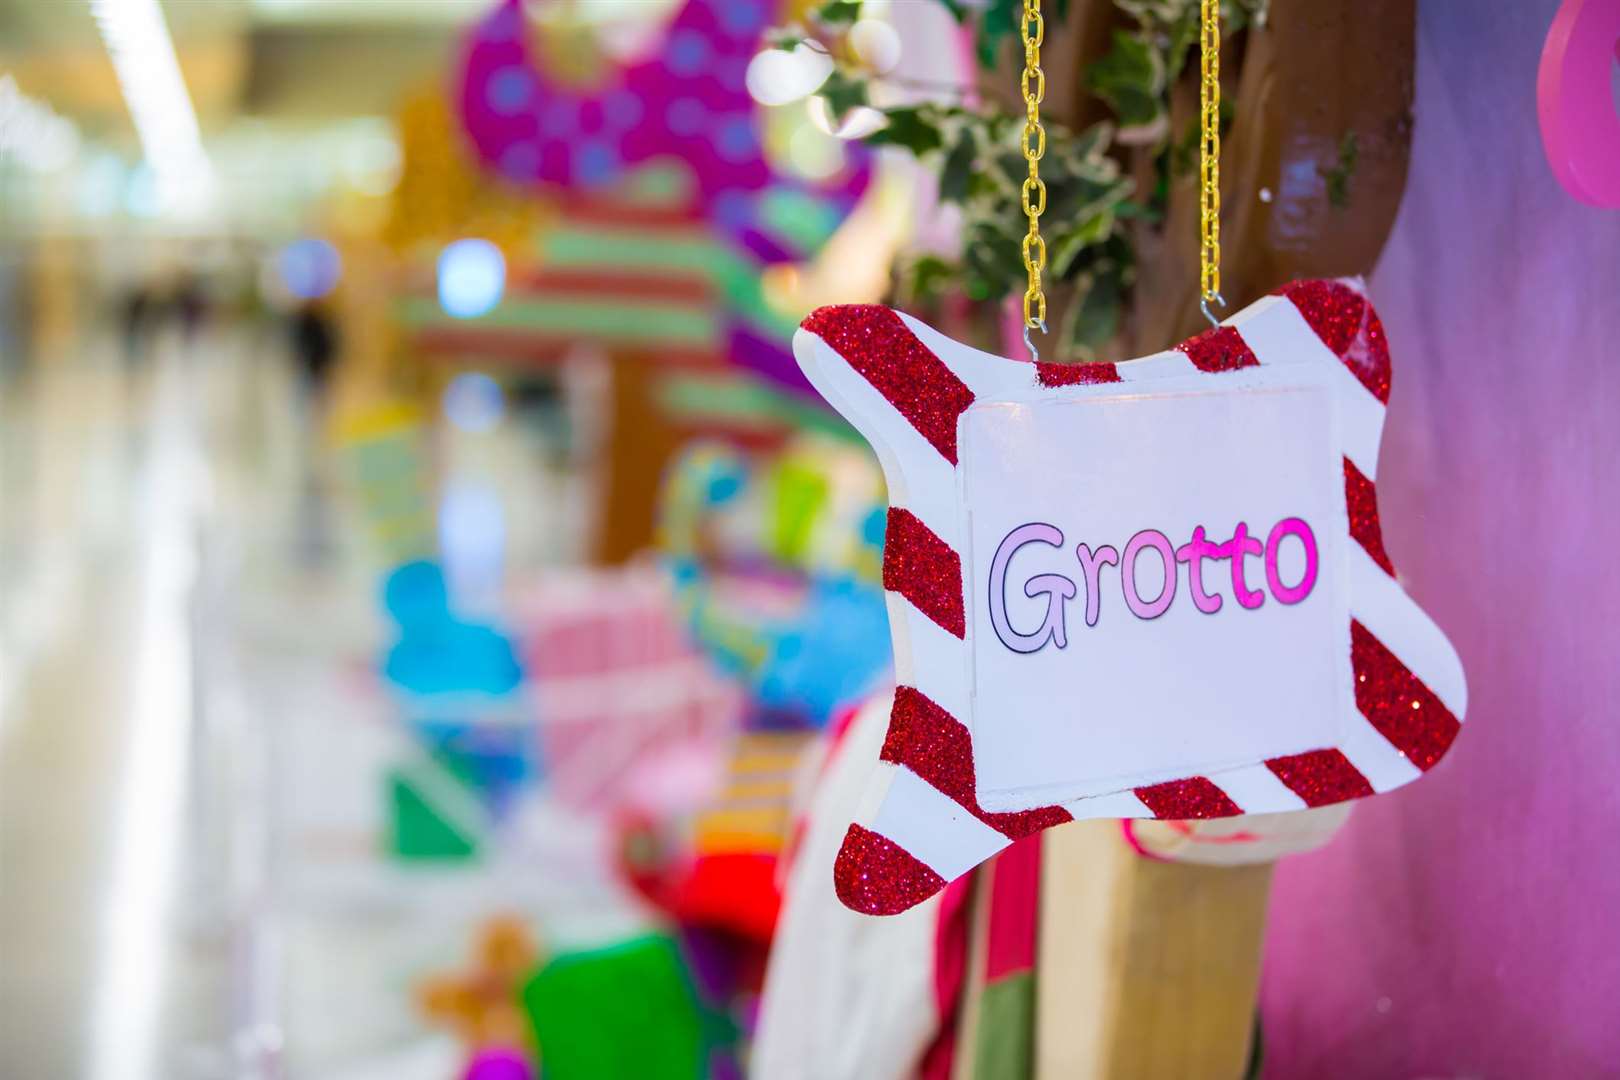 Grotto tickets are now on sale but there are additional options for families this year too